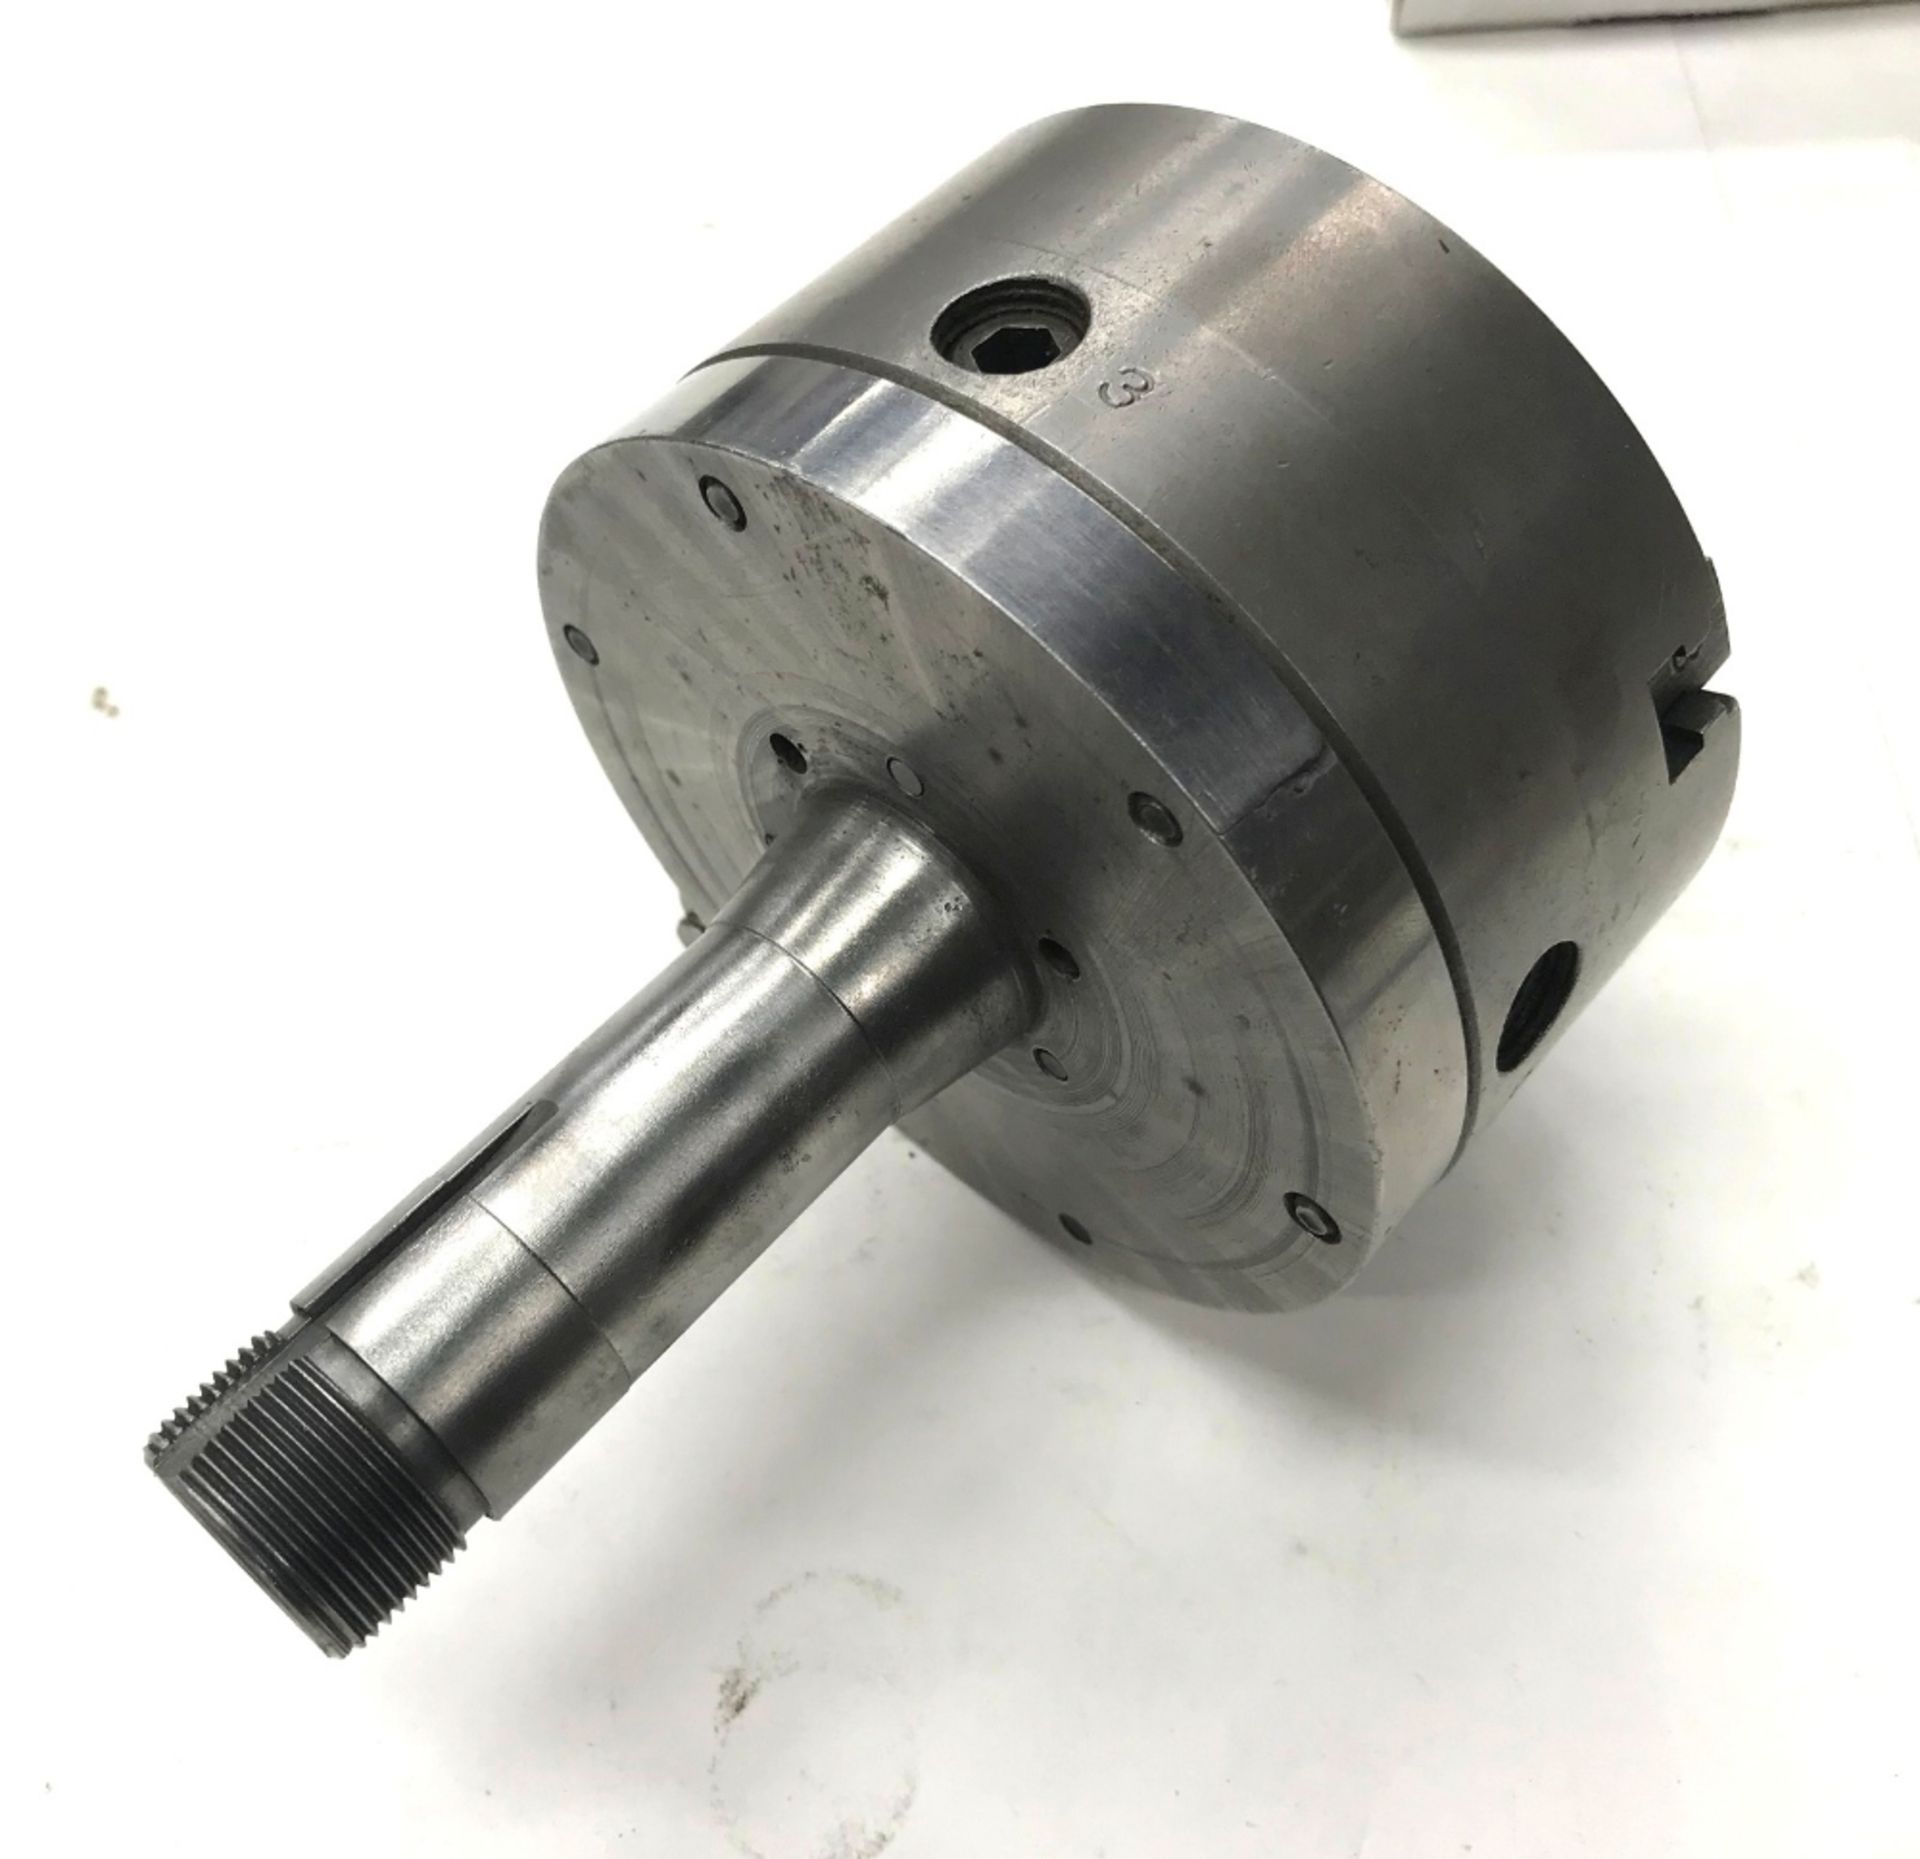 4" Buck Self-Centering 3-Jaw Chuck w/ 6K Collet Back Plate & Asst. 6K Collets - Image 2 of 4